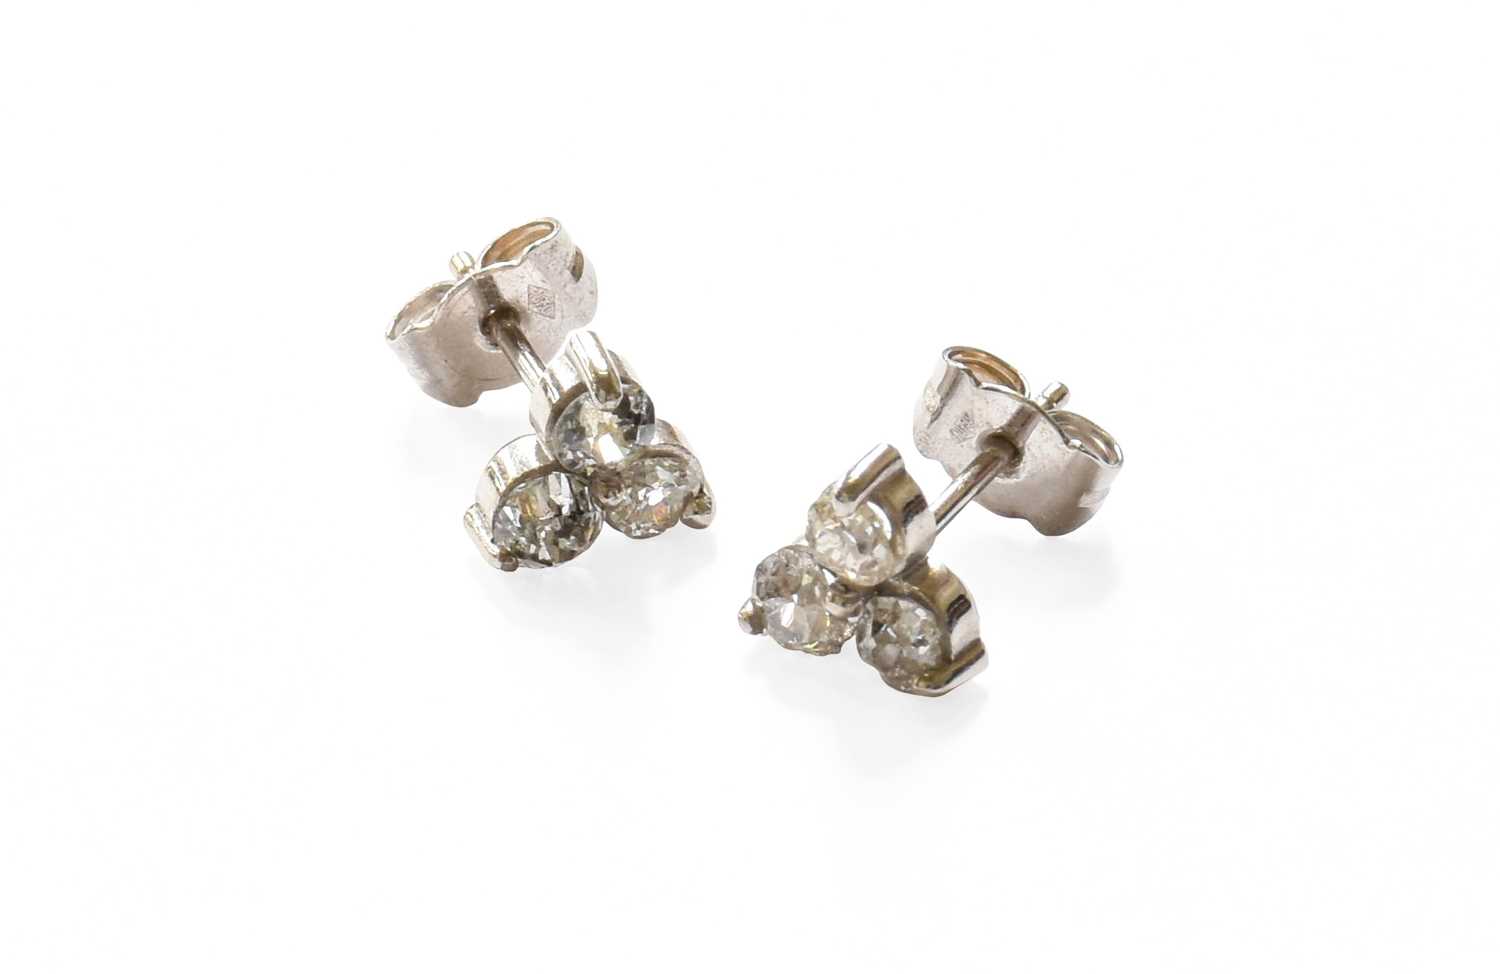 A Pair of Diamond Cluster Earrings, the trefoil motifs composed of old cut diamonds, in white claw